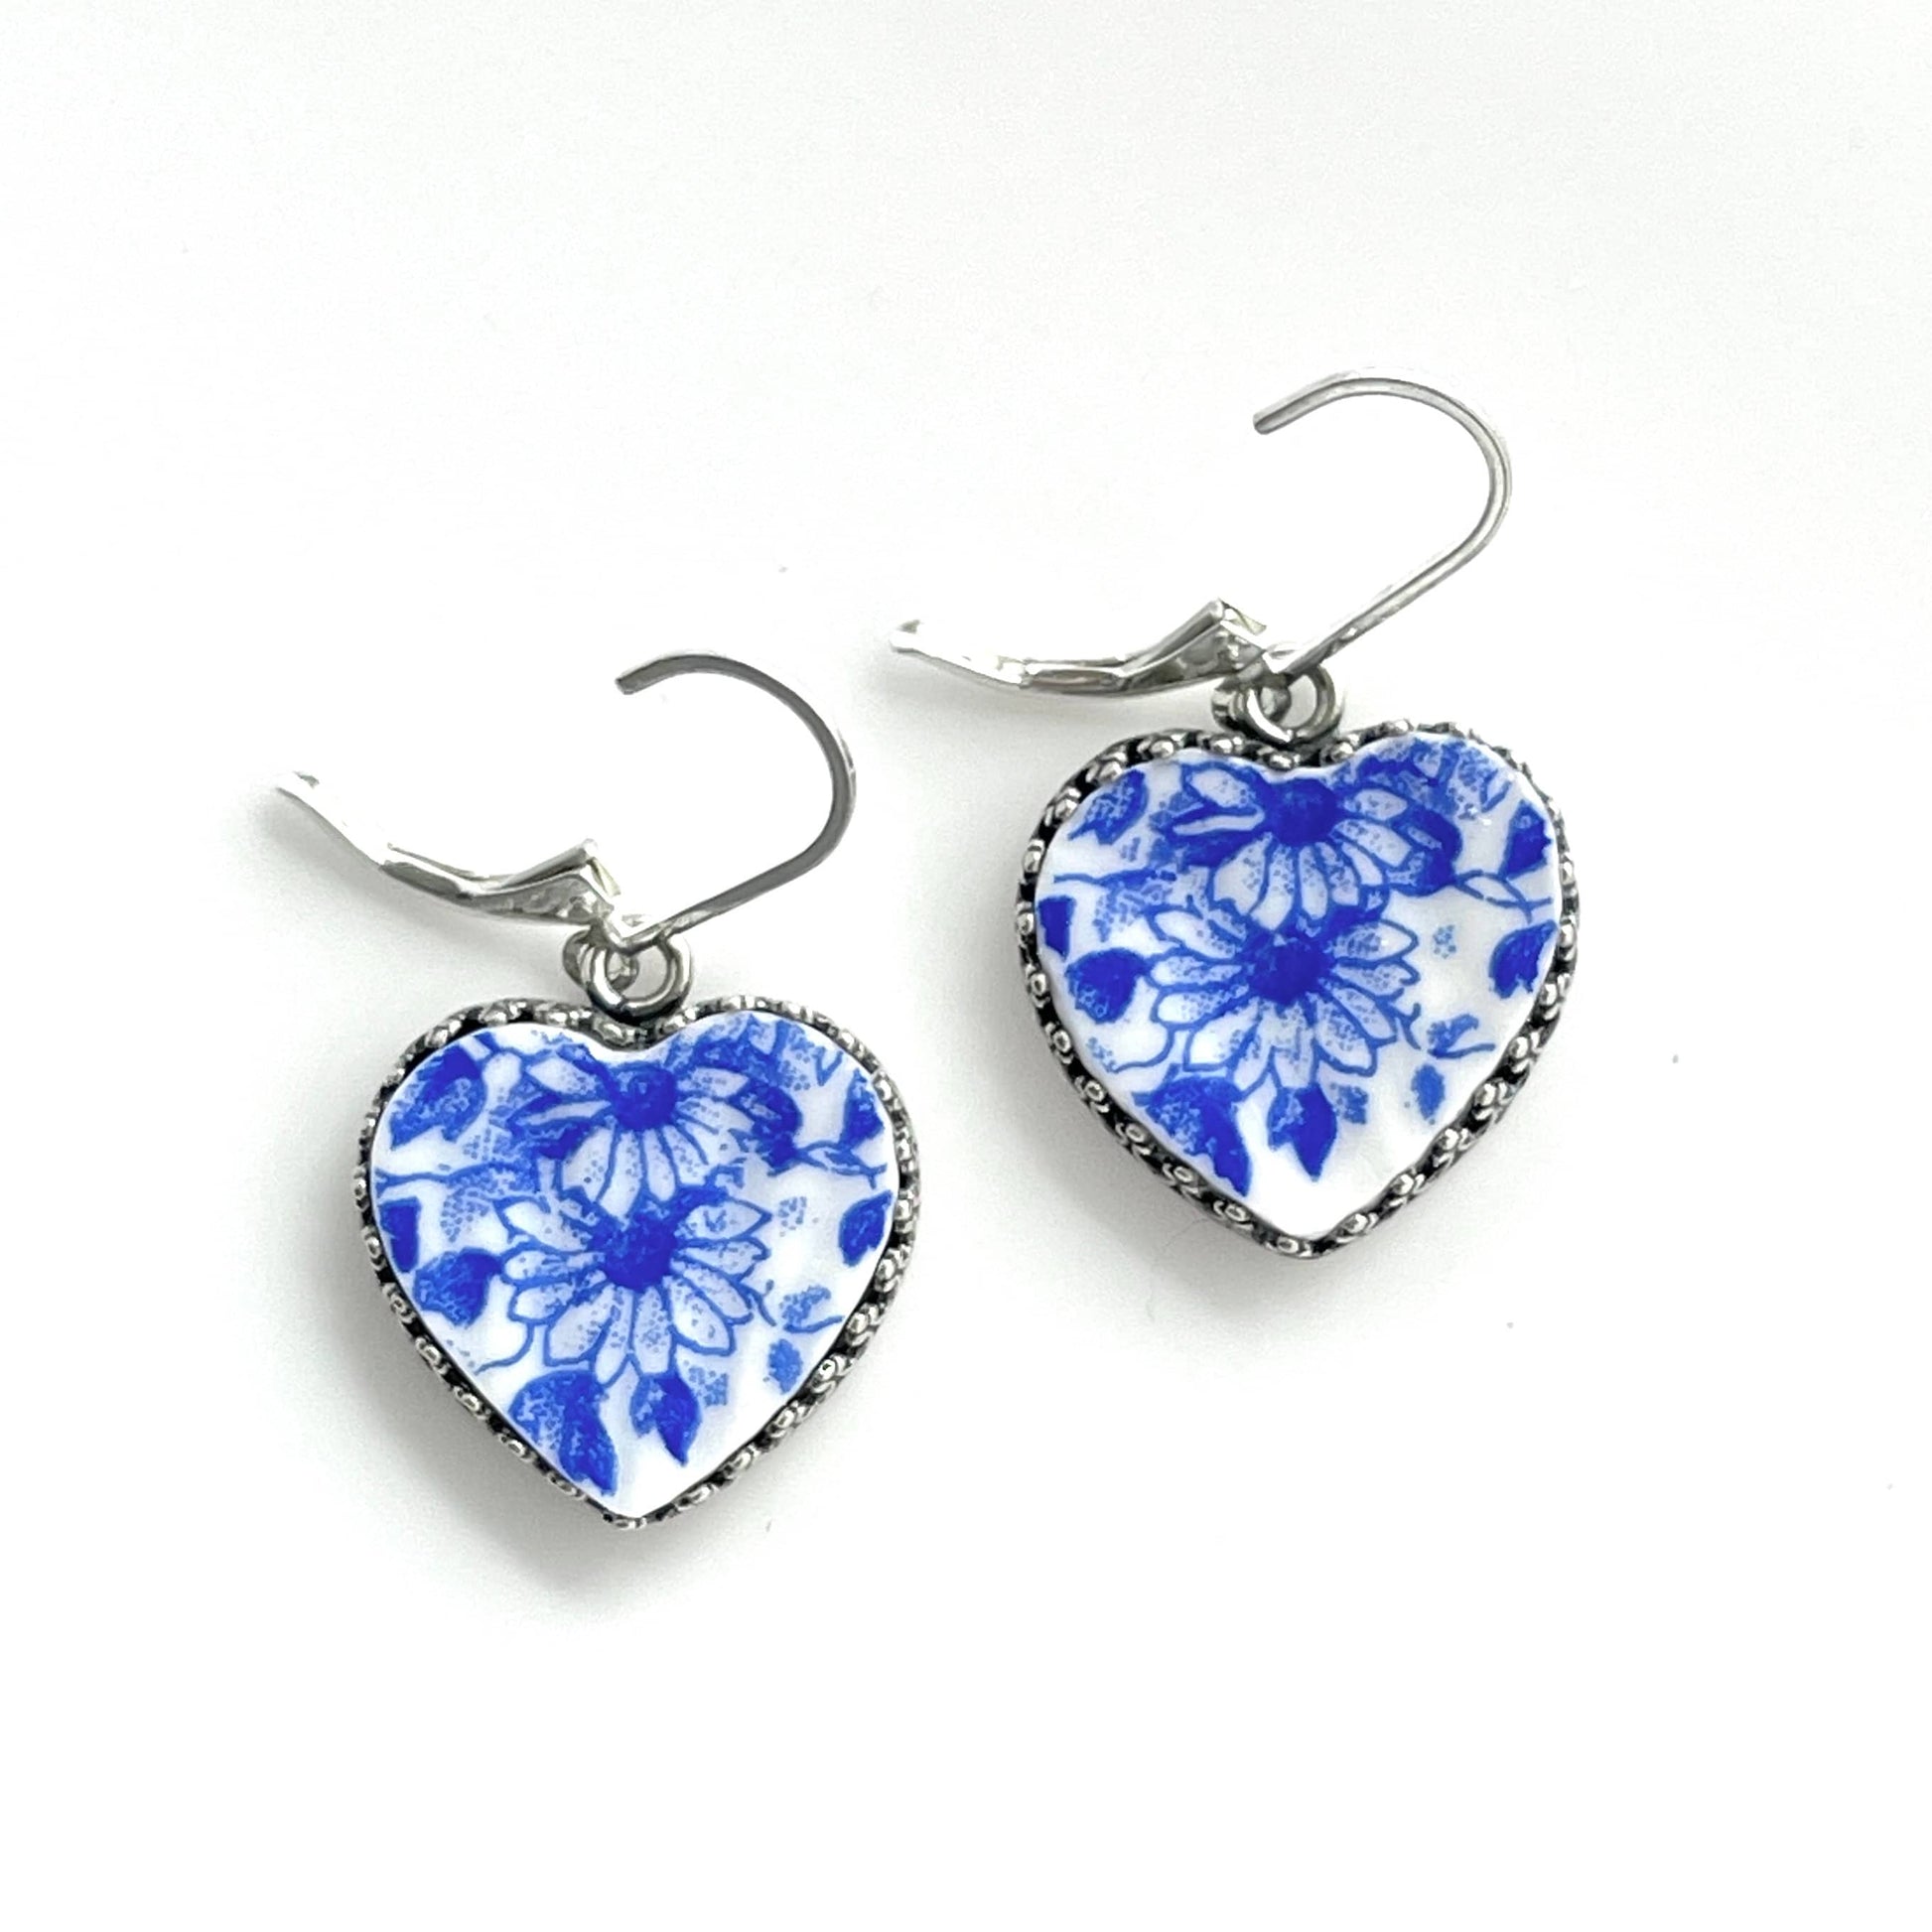 20th Anniversary Gift for Wife, Blue and White Broken China Jewelry Set, Heart Earrings, Jewelry Gift